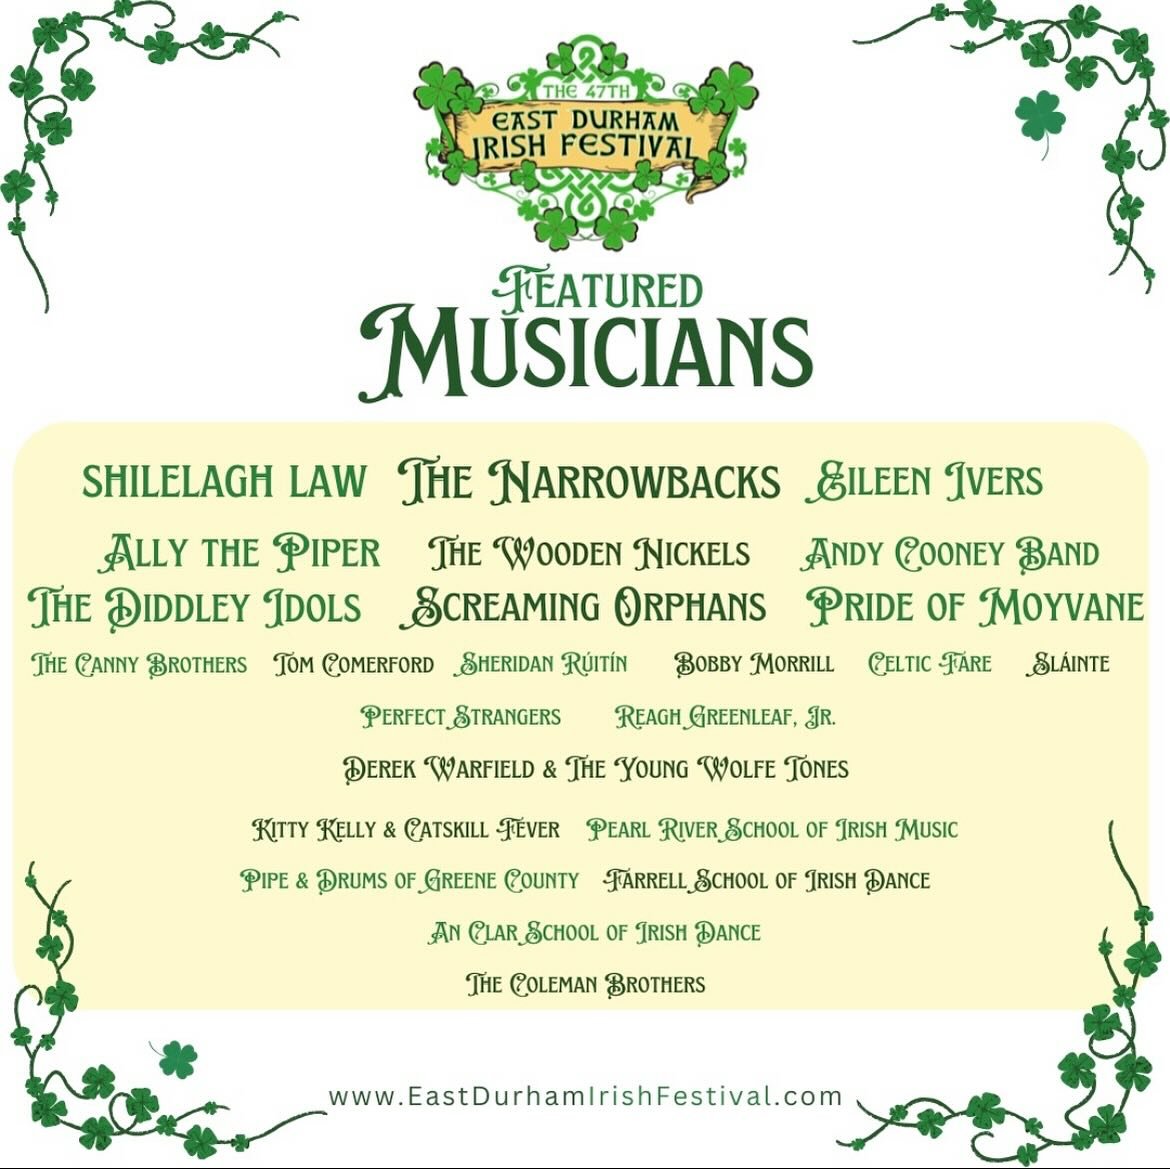 We&rsquo;ll be closing out this years East Durham Irish Festival on Sunday May 26th at 7pm on the &ldquo;Tip Top Stage&rdquo;. We&rsquo;ll see you all there!! #brooklynsown #cbb #eastdurhamirishfestival #celticrootsrock #celticfolk #celticpunk #goodc